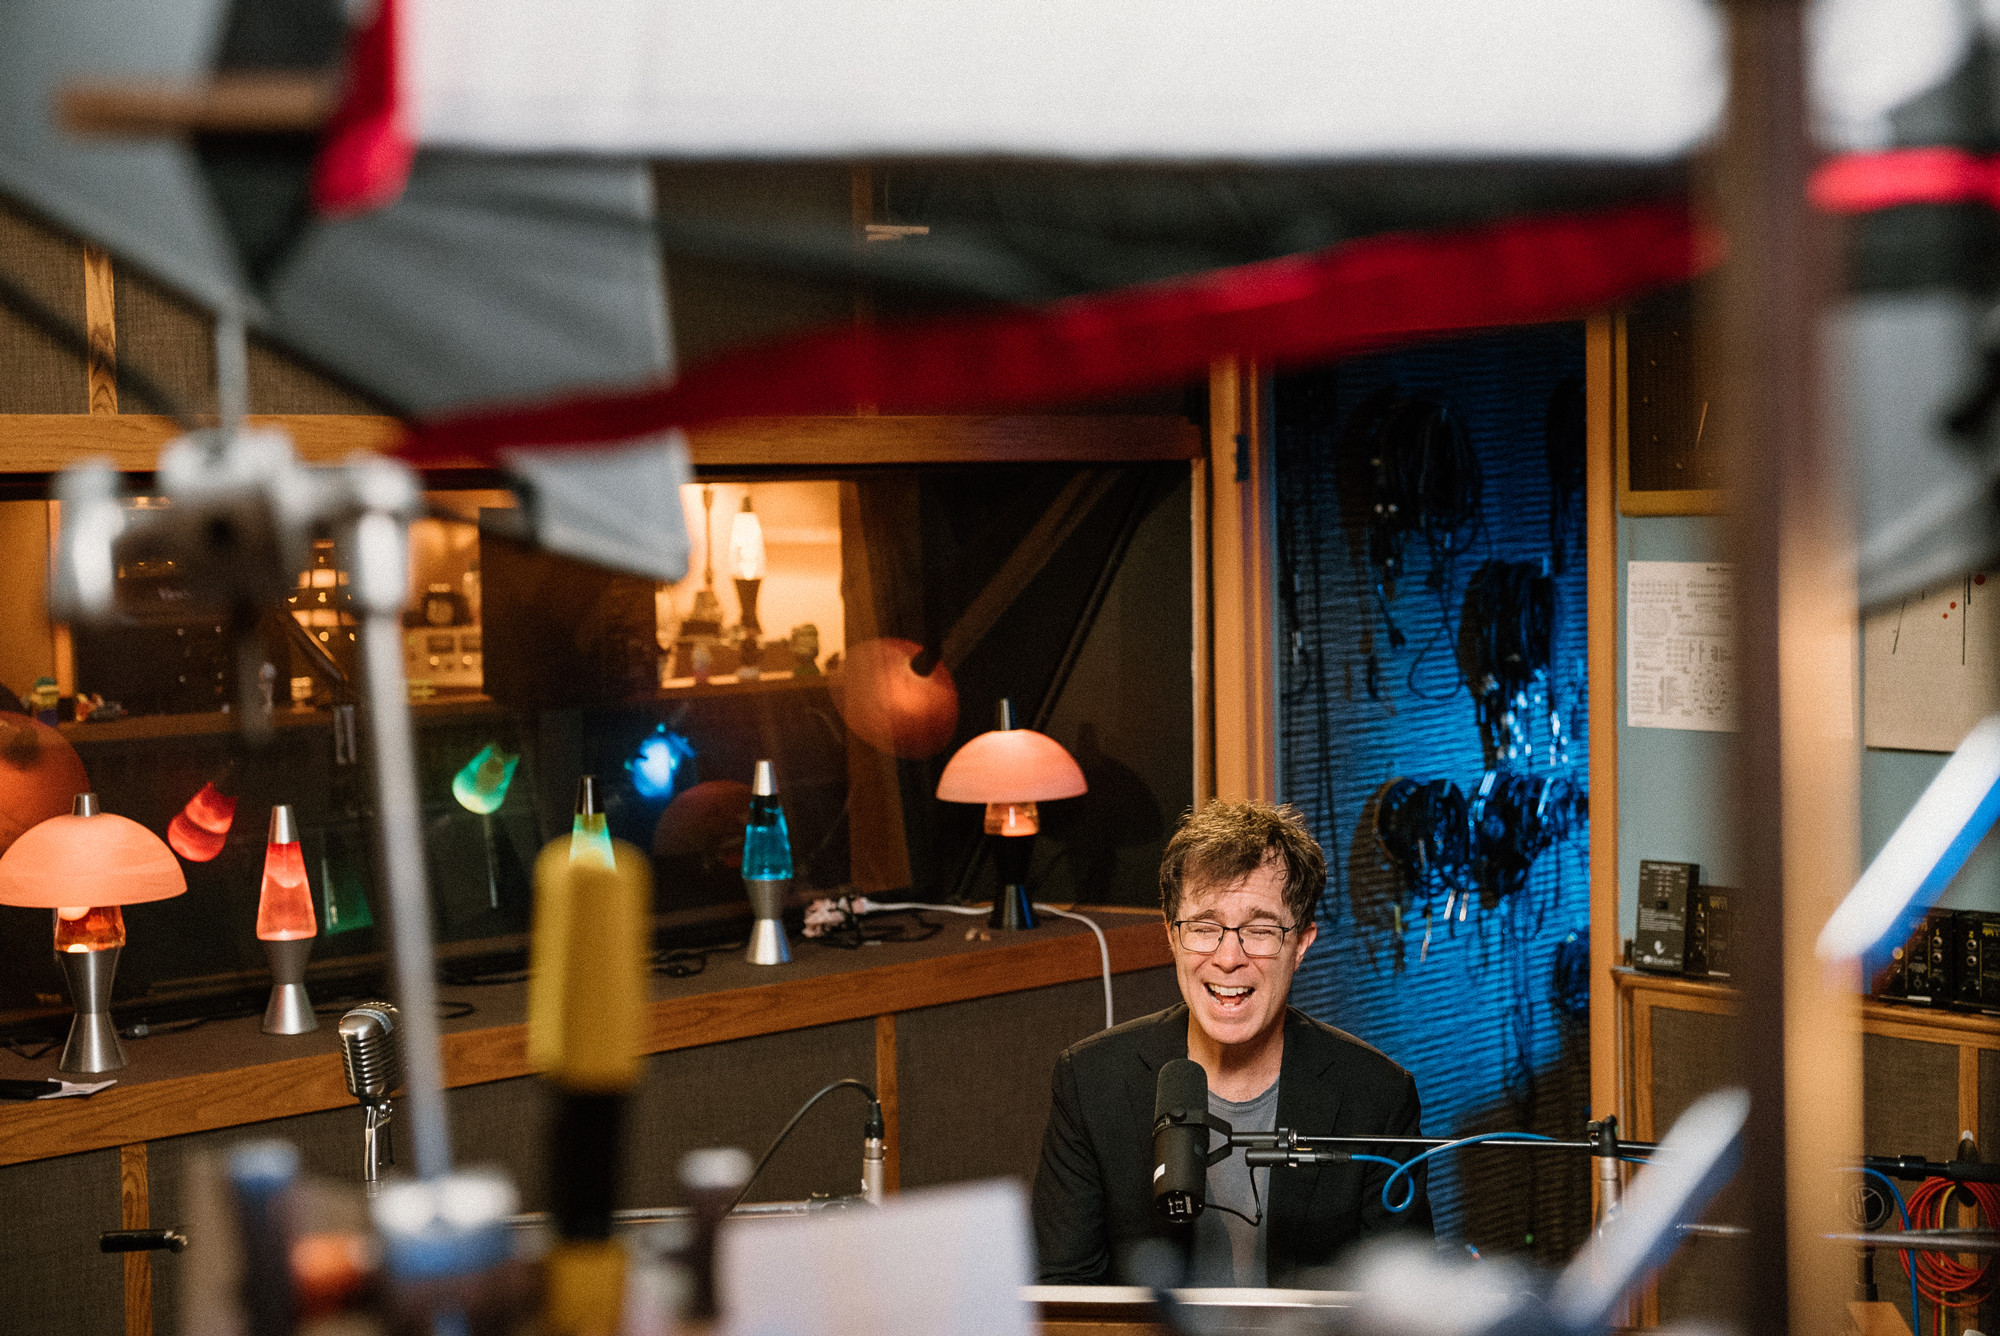 Ben Folds singing in a studio with lava lamps and equipment surrounding him.